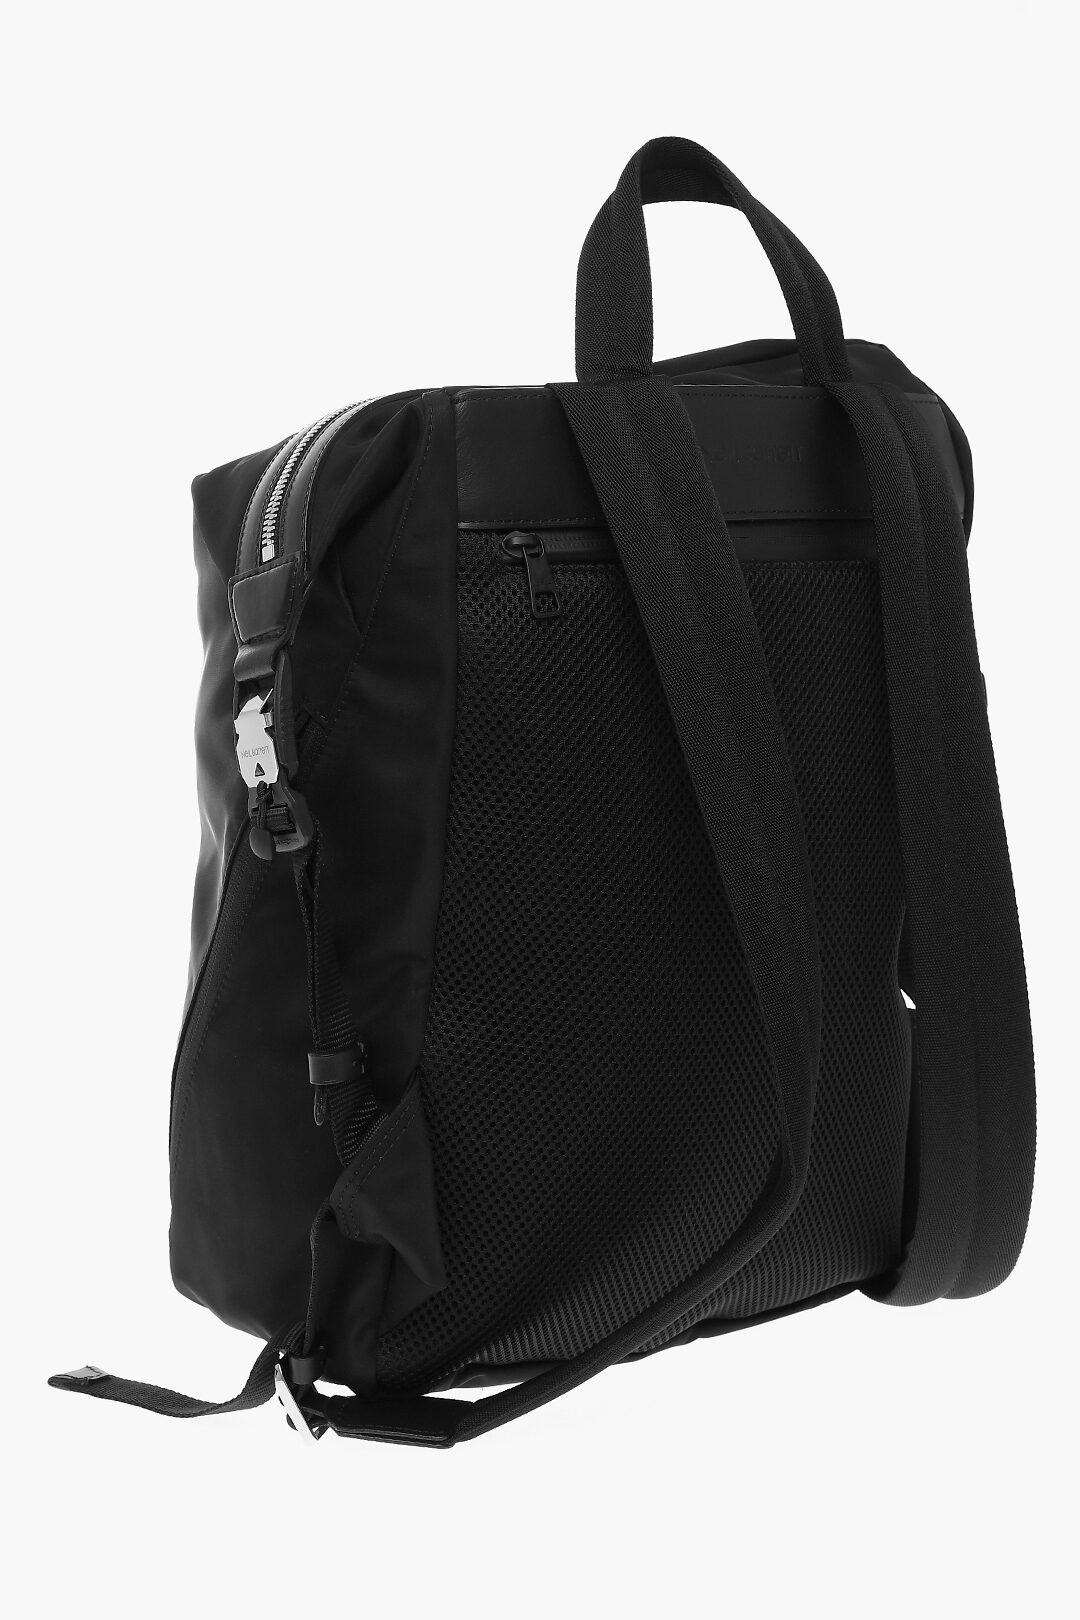 Neil Barrett Technical Fabric ENAMEL BADGE Backpack with Leather ...